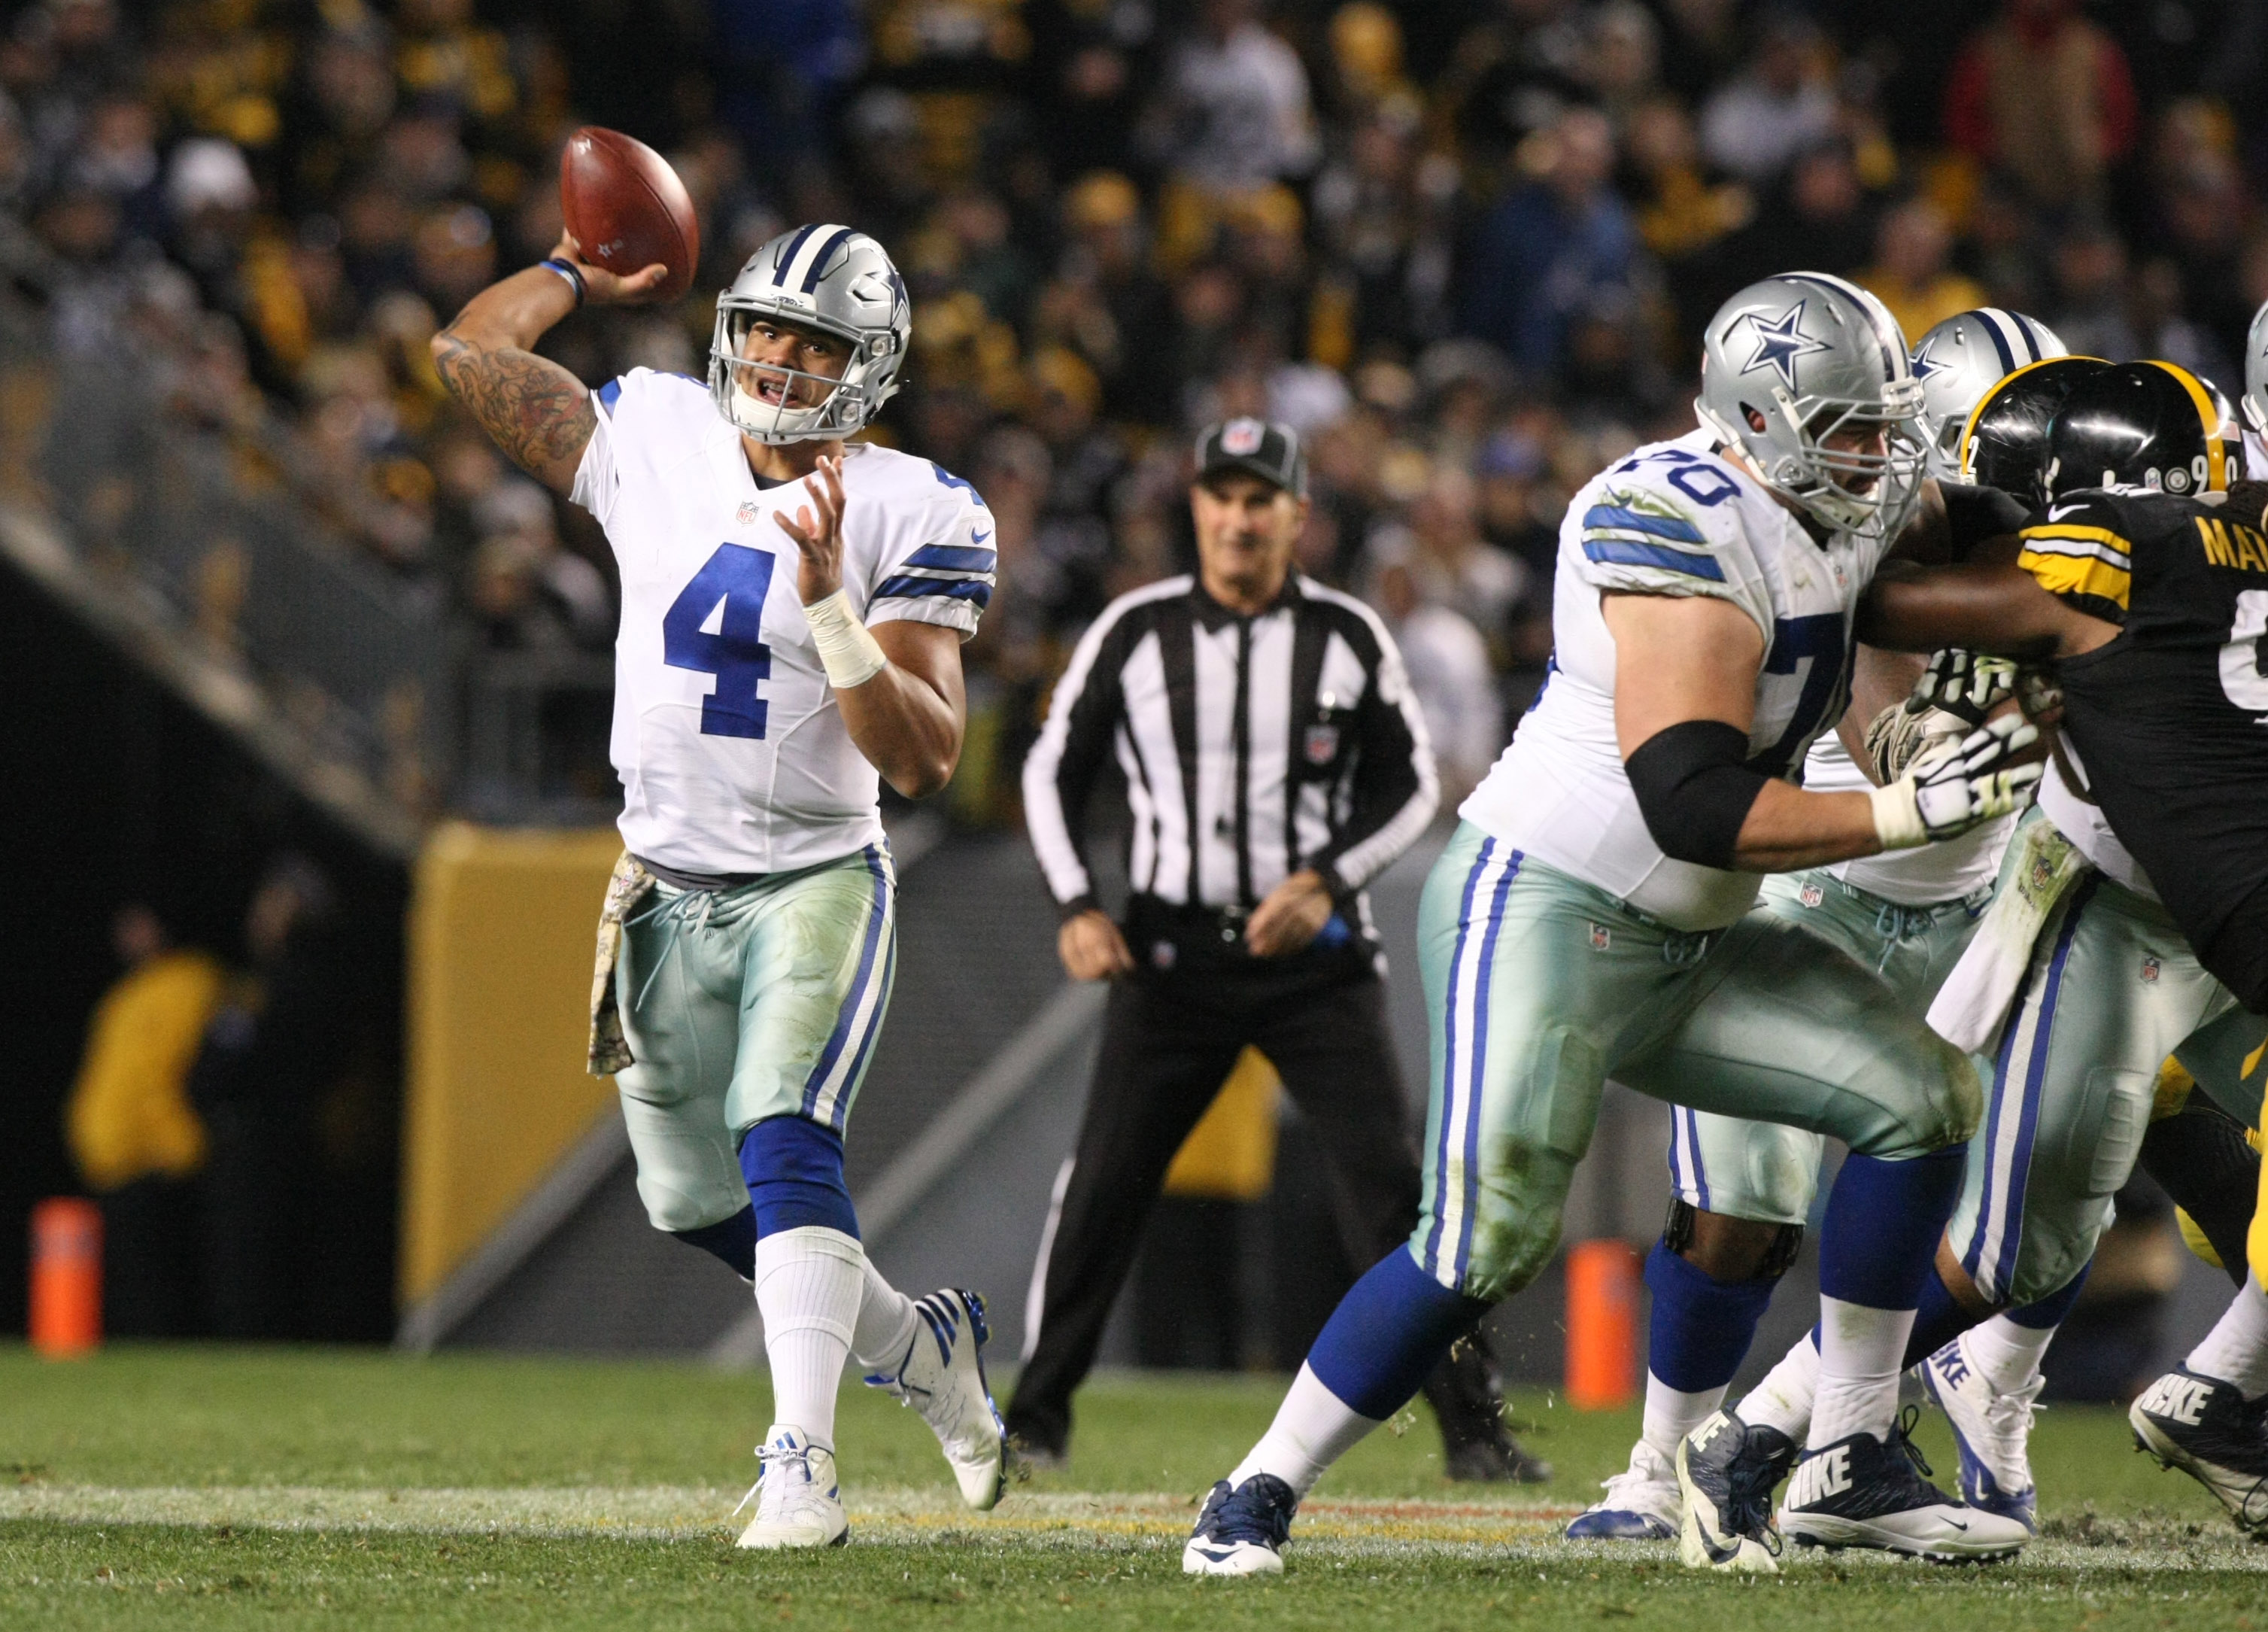 The Cowboys' 35-30 win over the Steelers was the most entertaining